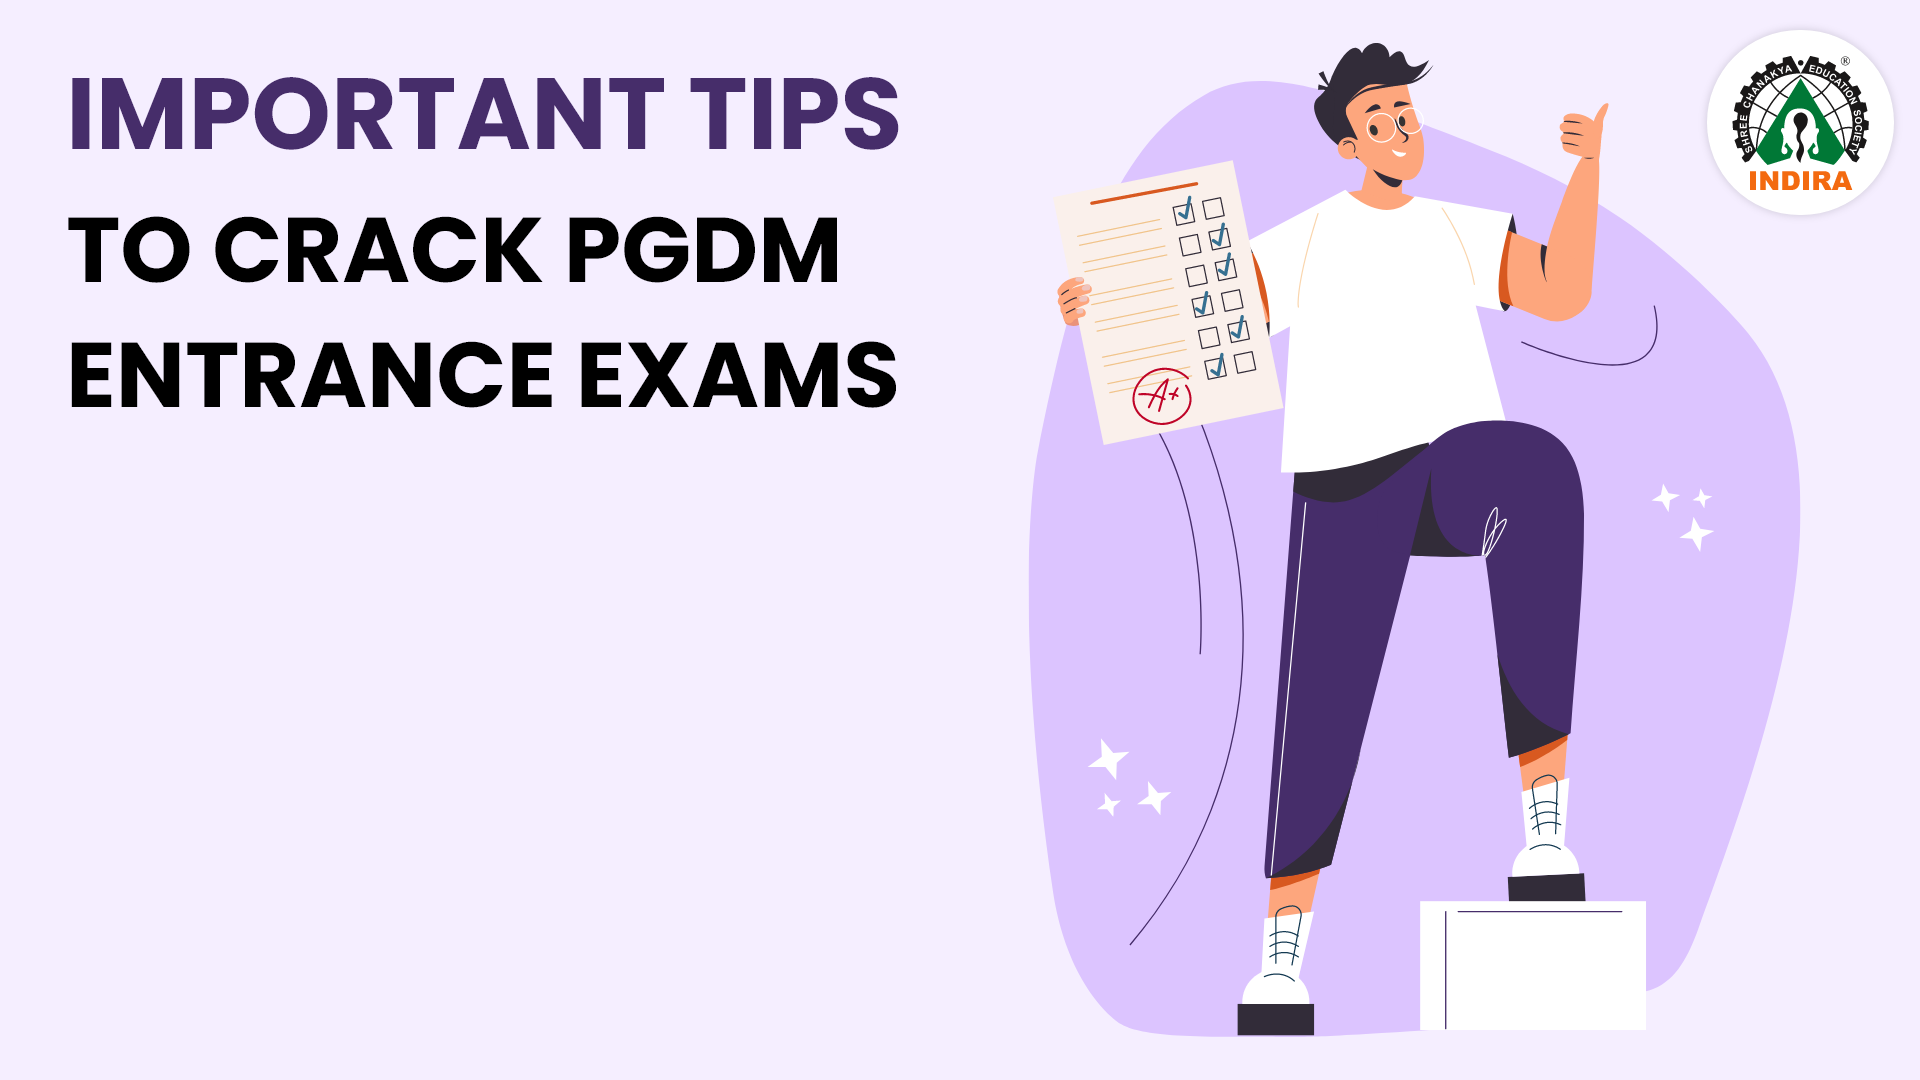 Important Tips to Crack PGDM Entrance Exams